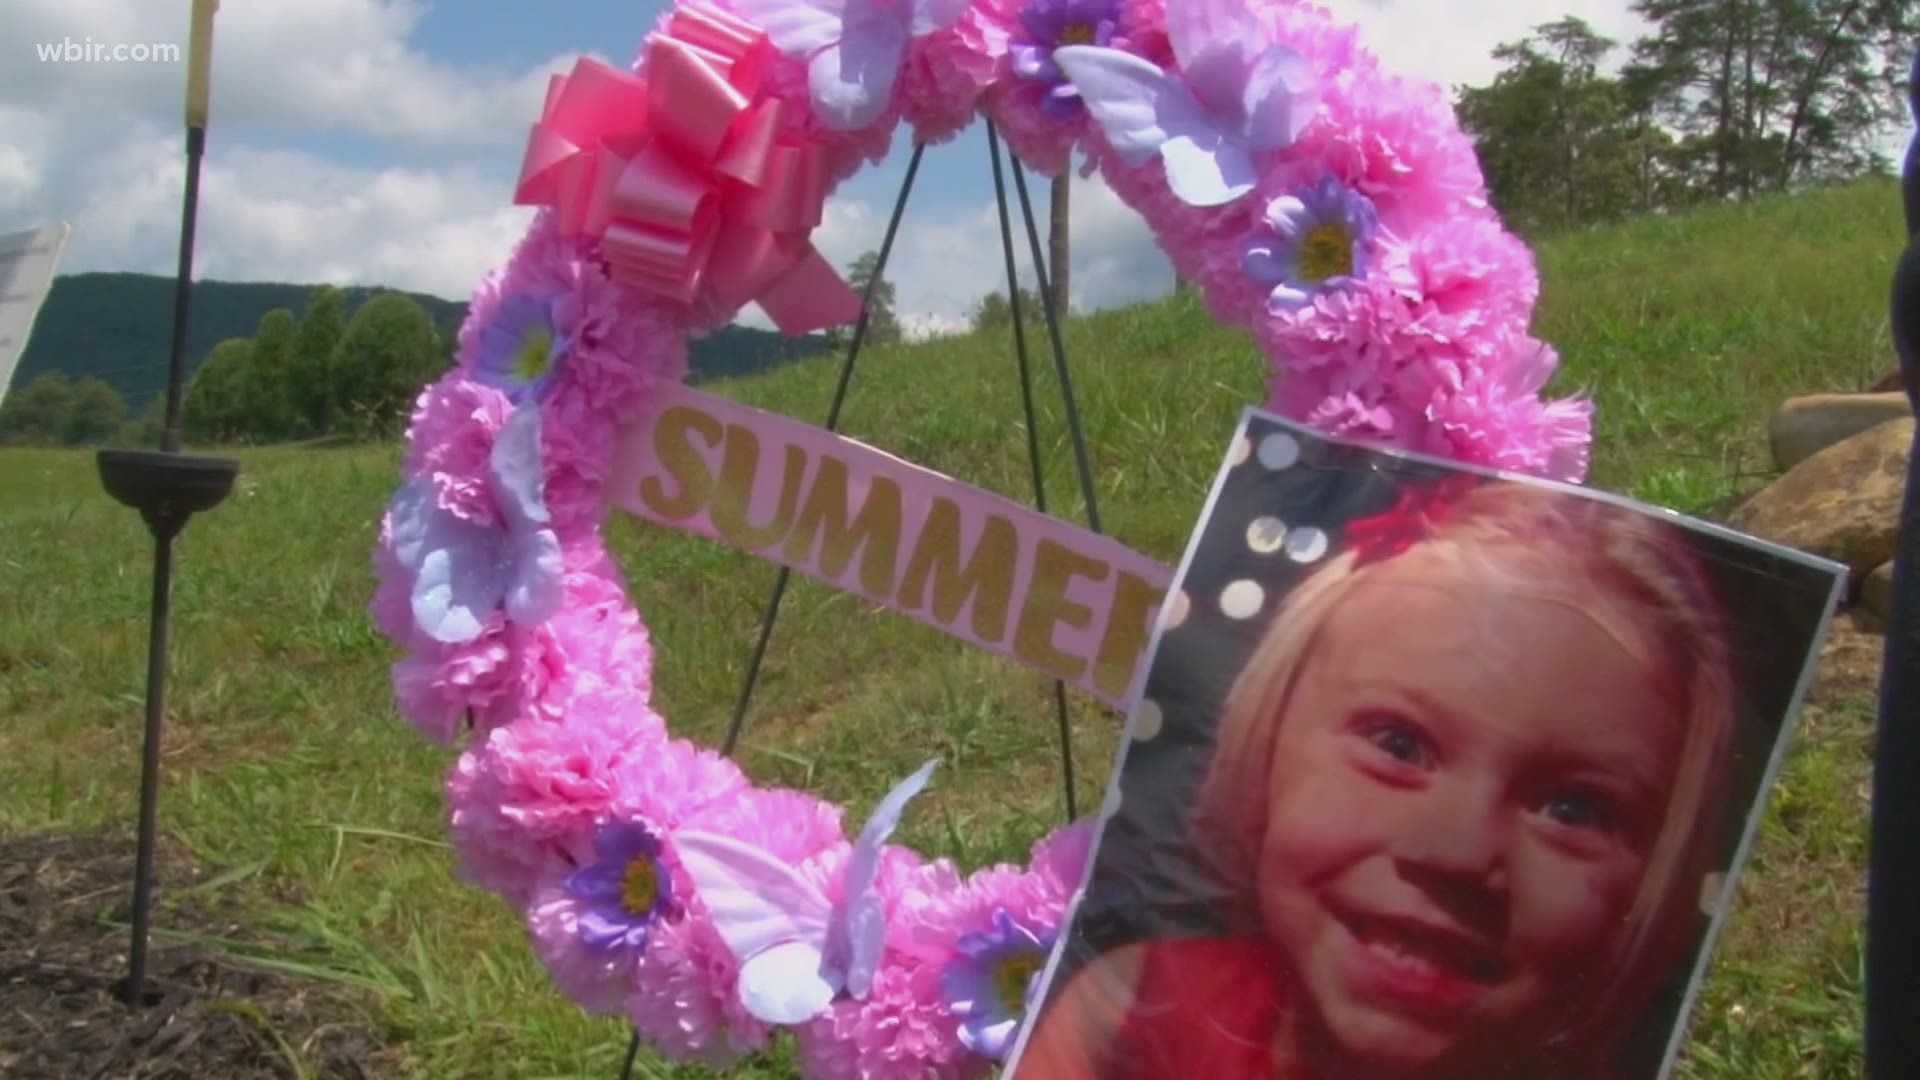 The exhaustive search for 5-year-old Summer Wells is approaching one week in Hawkins County.